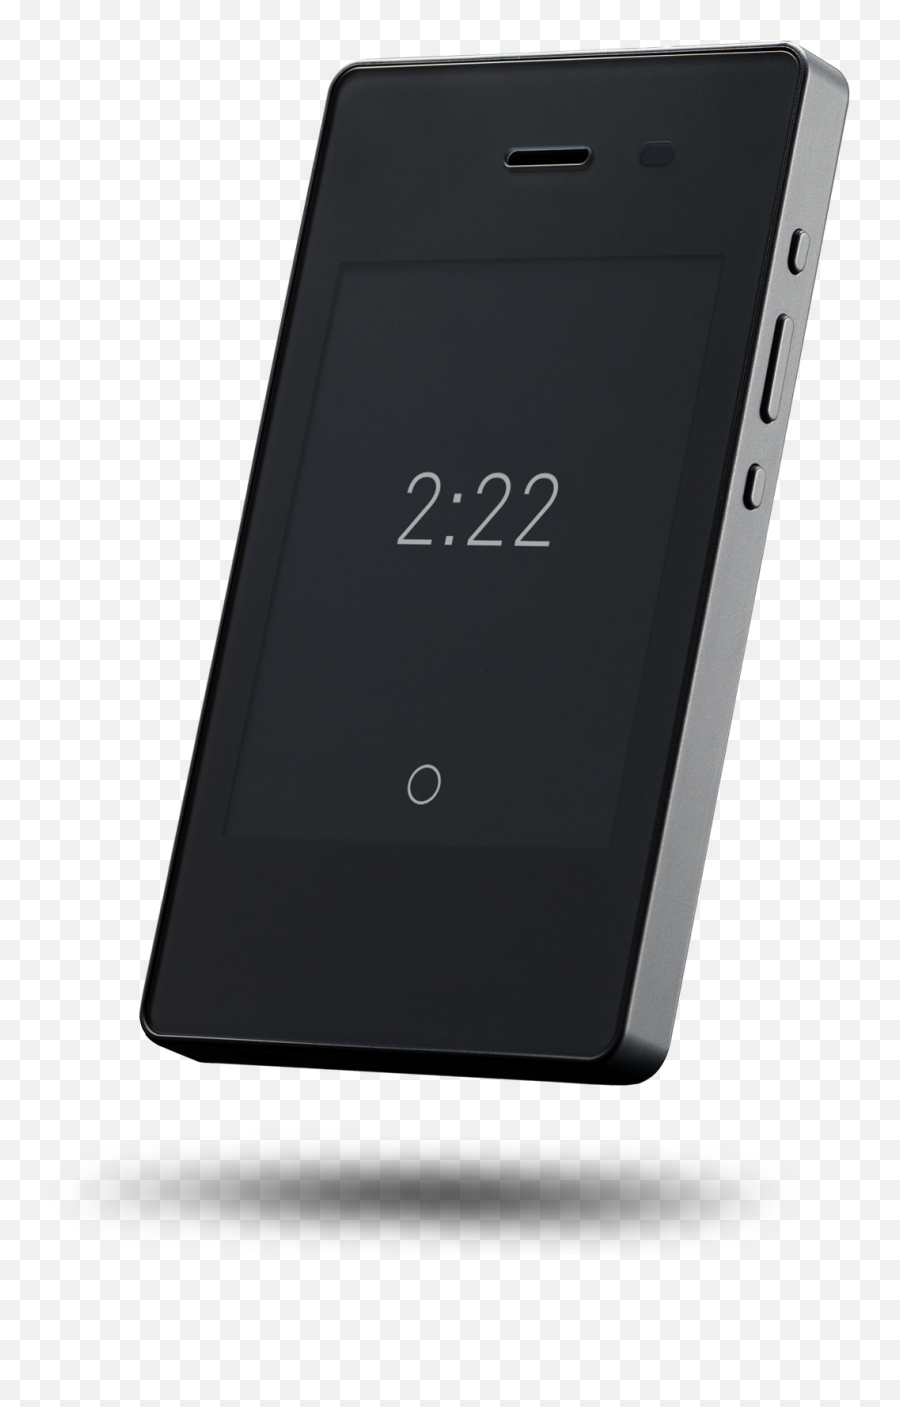 The Light Phone - Small Phones For A Kid Emoji,Phone Png